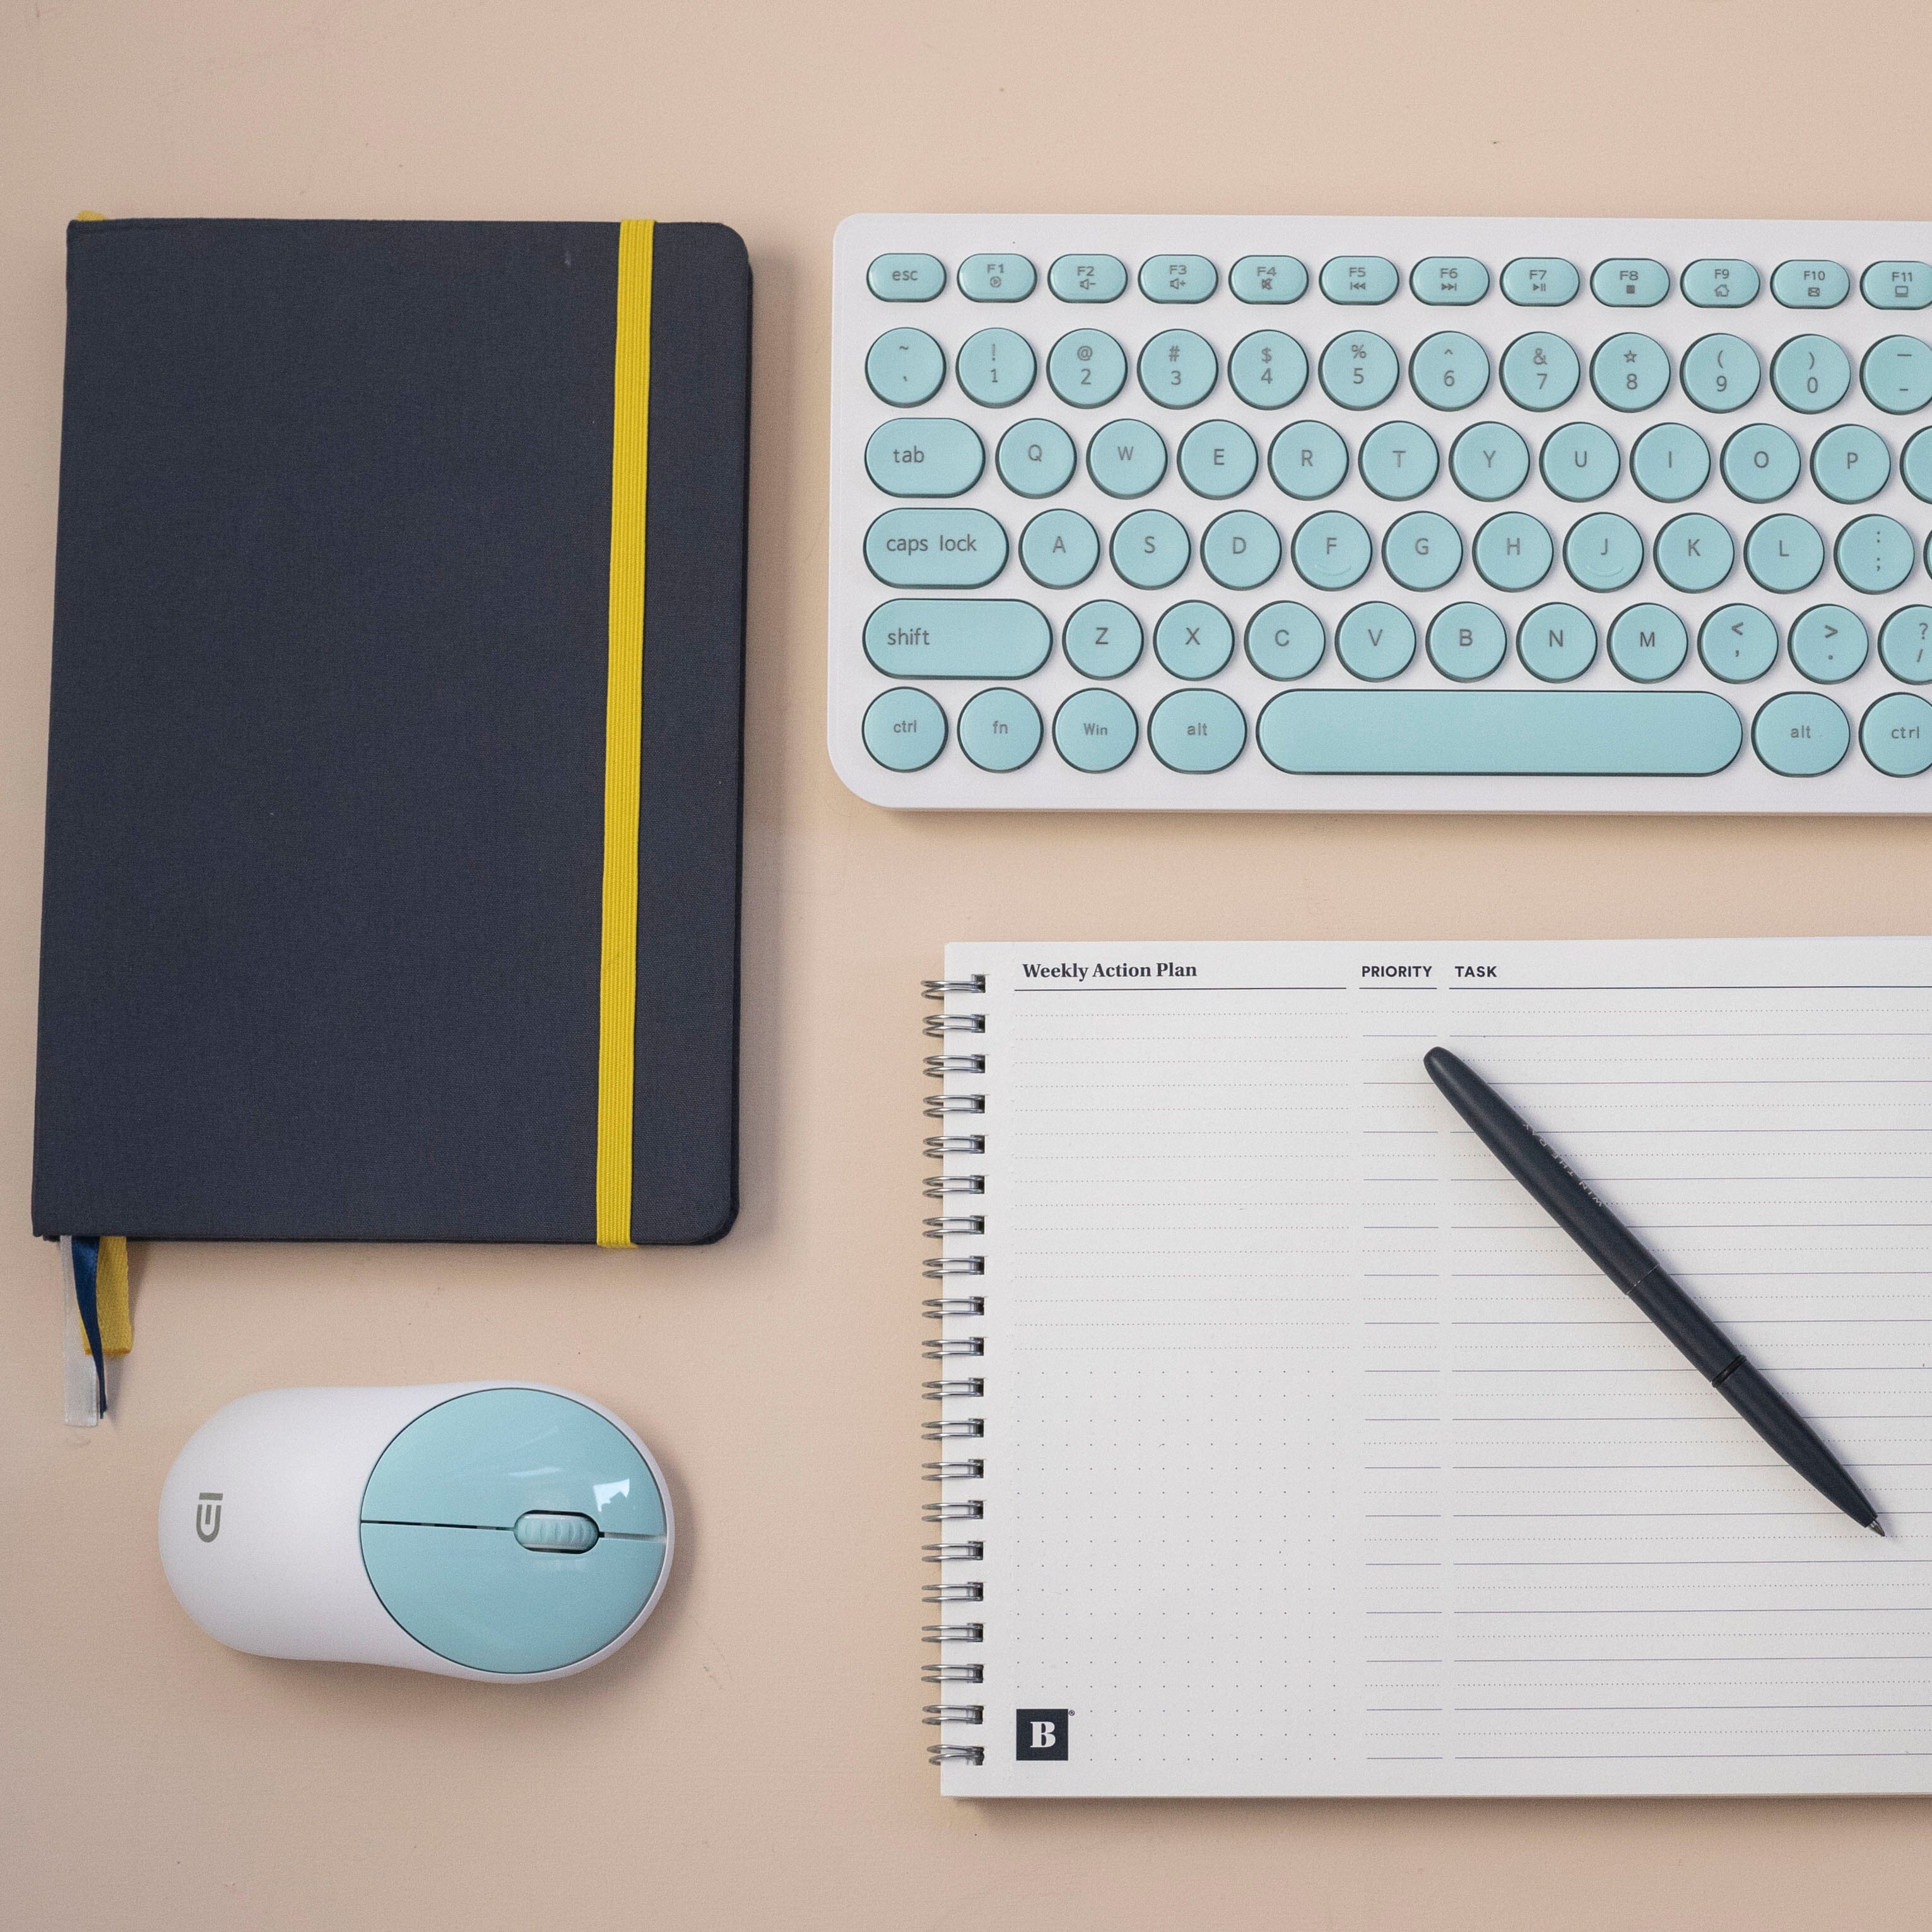 Weekly Action Pad blank with win the day pen, Self Journal, keyboard, and mouse on desk